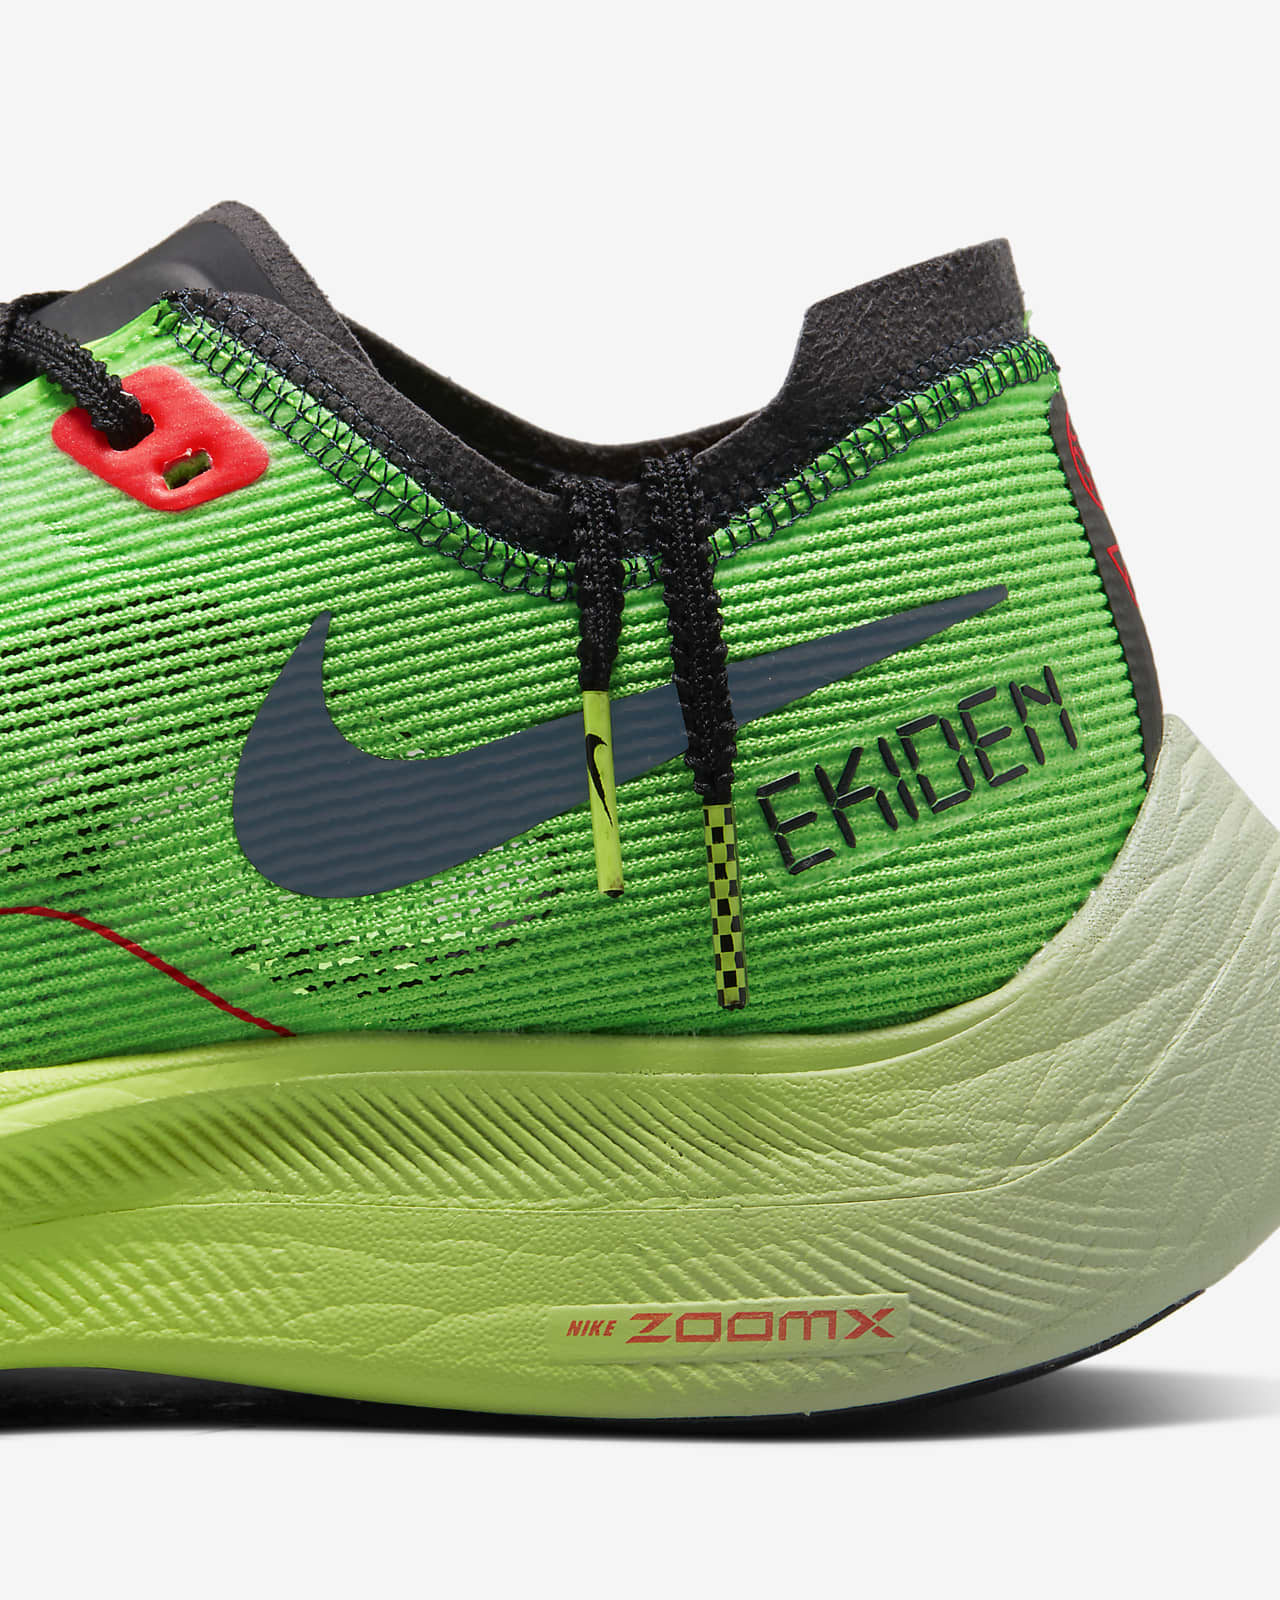 Vaporfly 2 Men's Road Racing Shoes. ID